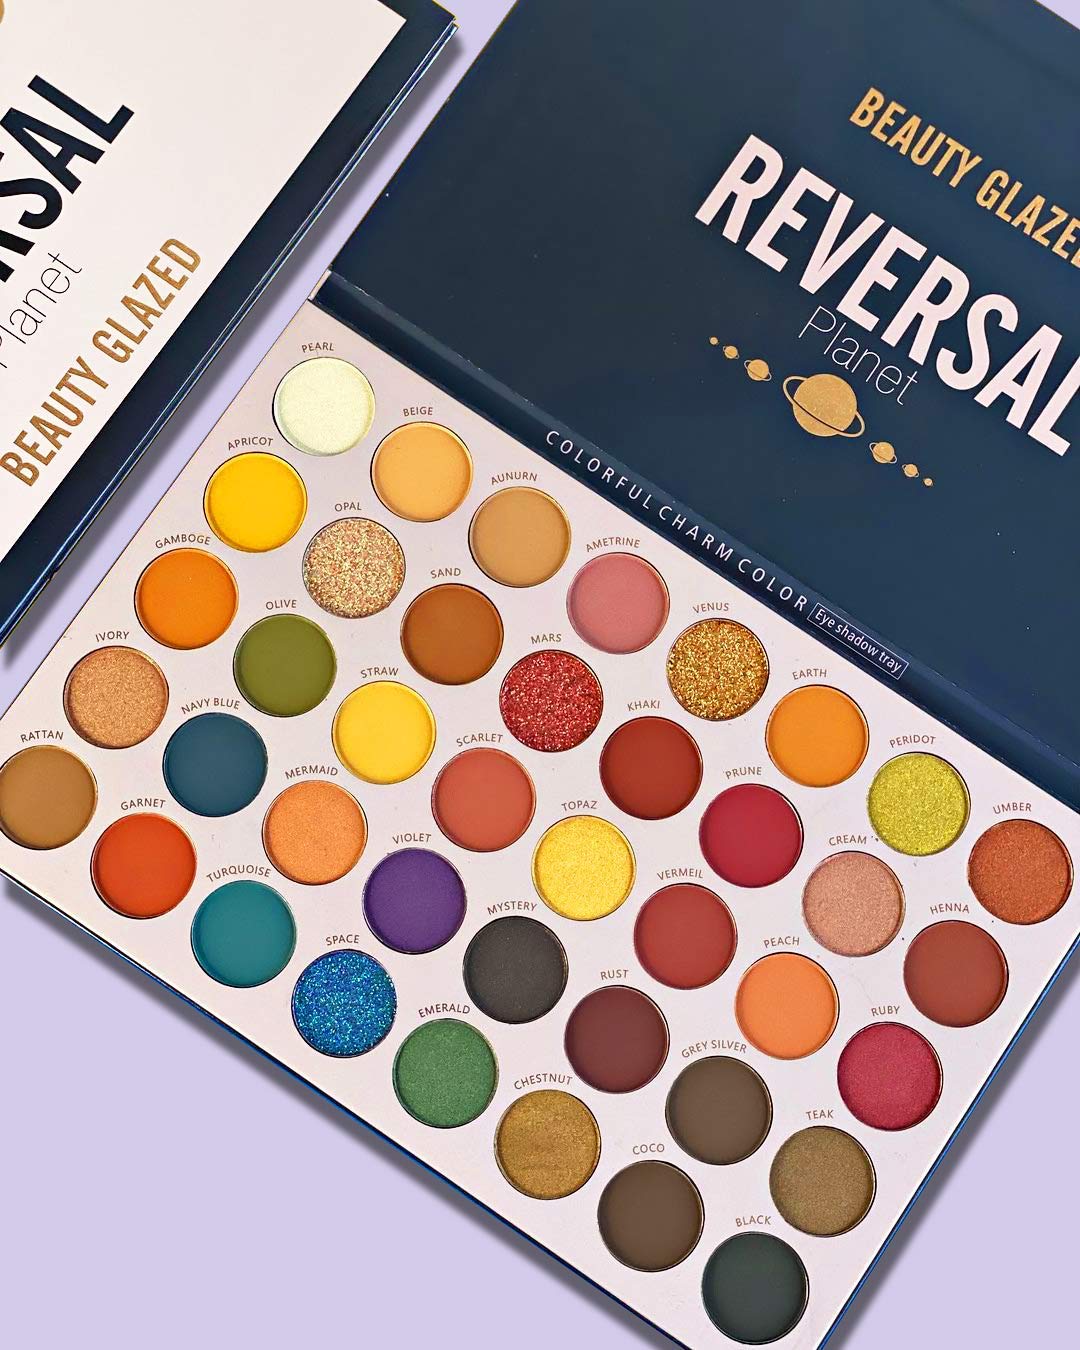  MYUANGO Reversal Planet 40 Colors Eyeshadow Makeup Palette Eye Shadow Pallet Matte and Shimmers Pigmented Blendable Waterproof